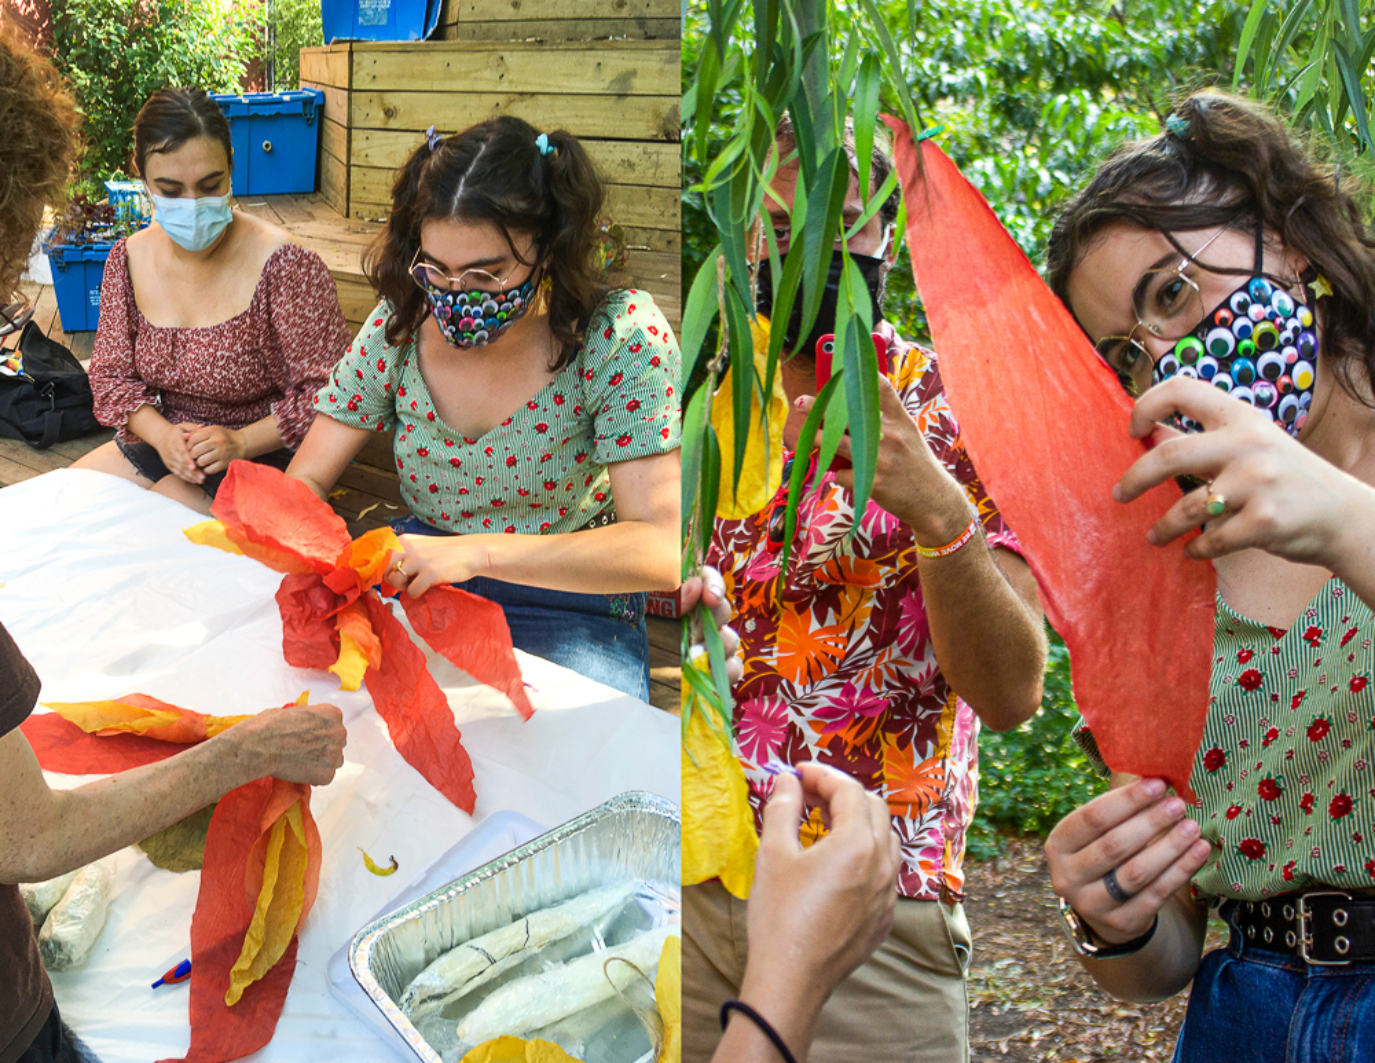 This is a split image: Left: artists sit around a white table and build large red and yellow flowers. Masked. Right: The same artists have tied their completed flowers made of silk to the trees to celebrate. One artist is holding a petal and looking intently at it, with joy in her eyes.